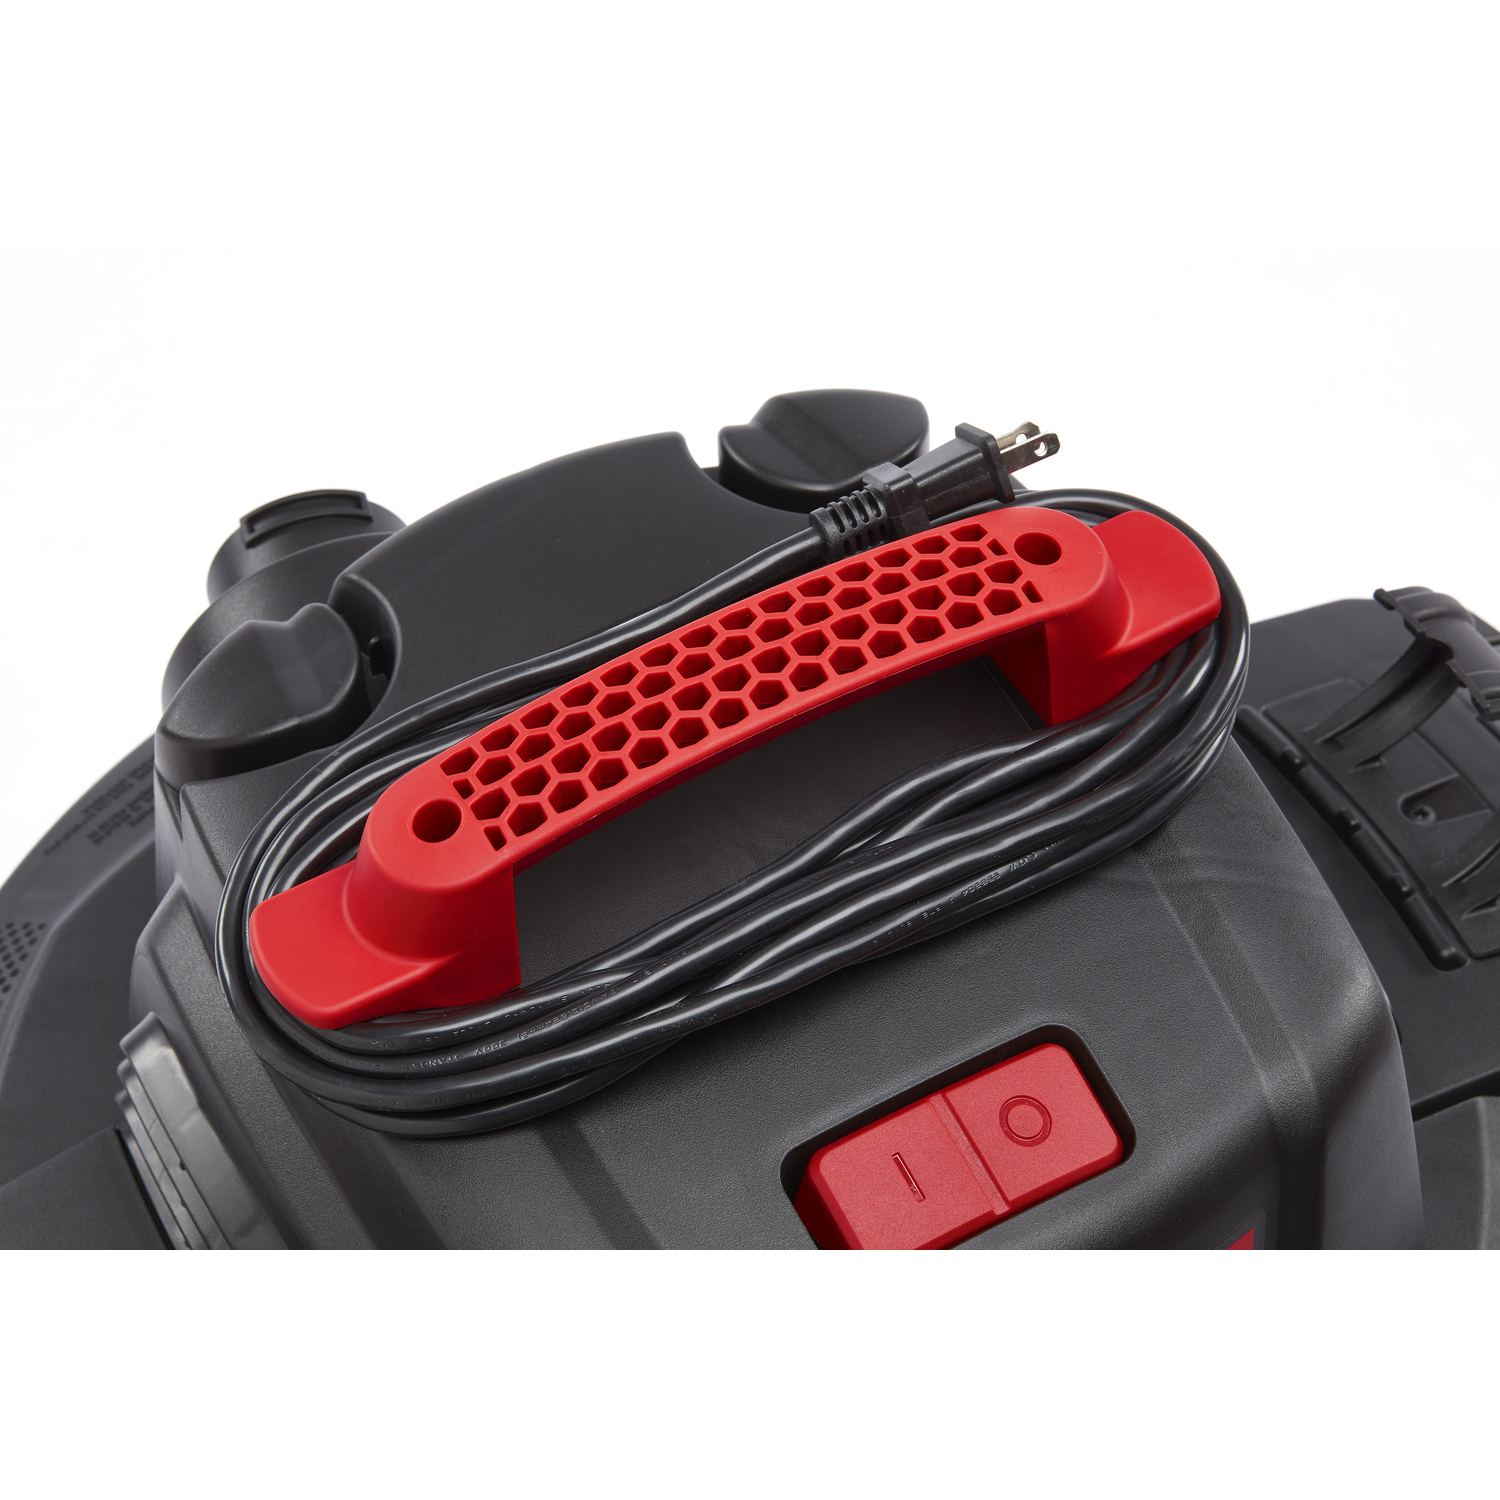 CRAFTSMAN 12 gal Corded Wet/Dry Vacuum 10.5 amps 120 V 6 HP